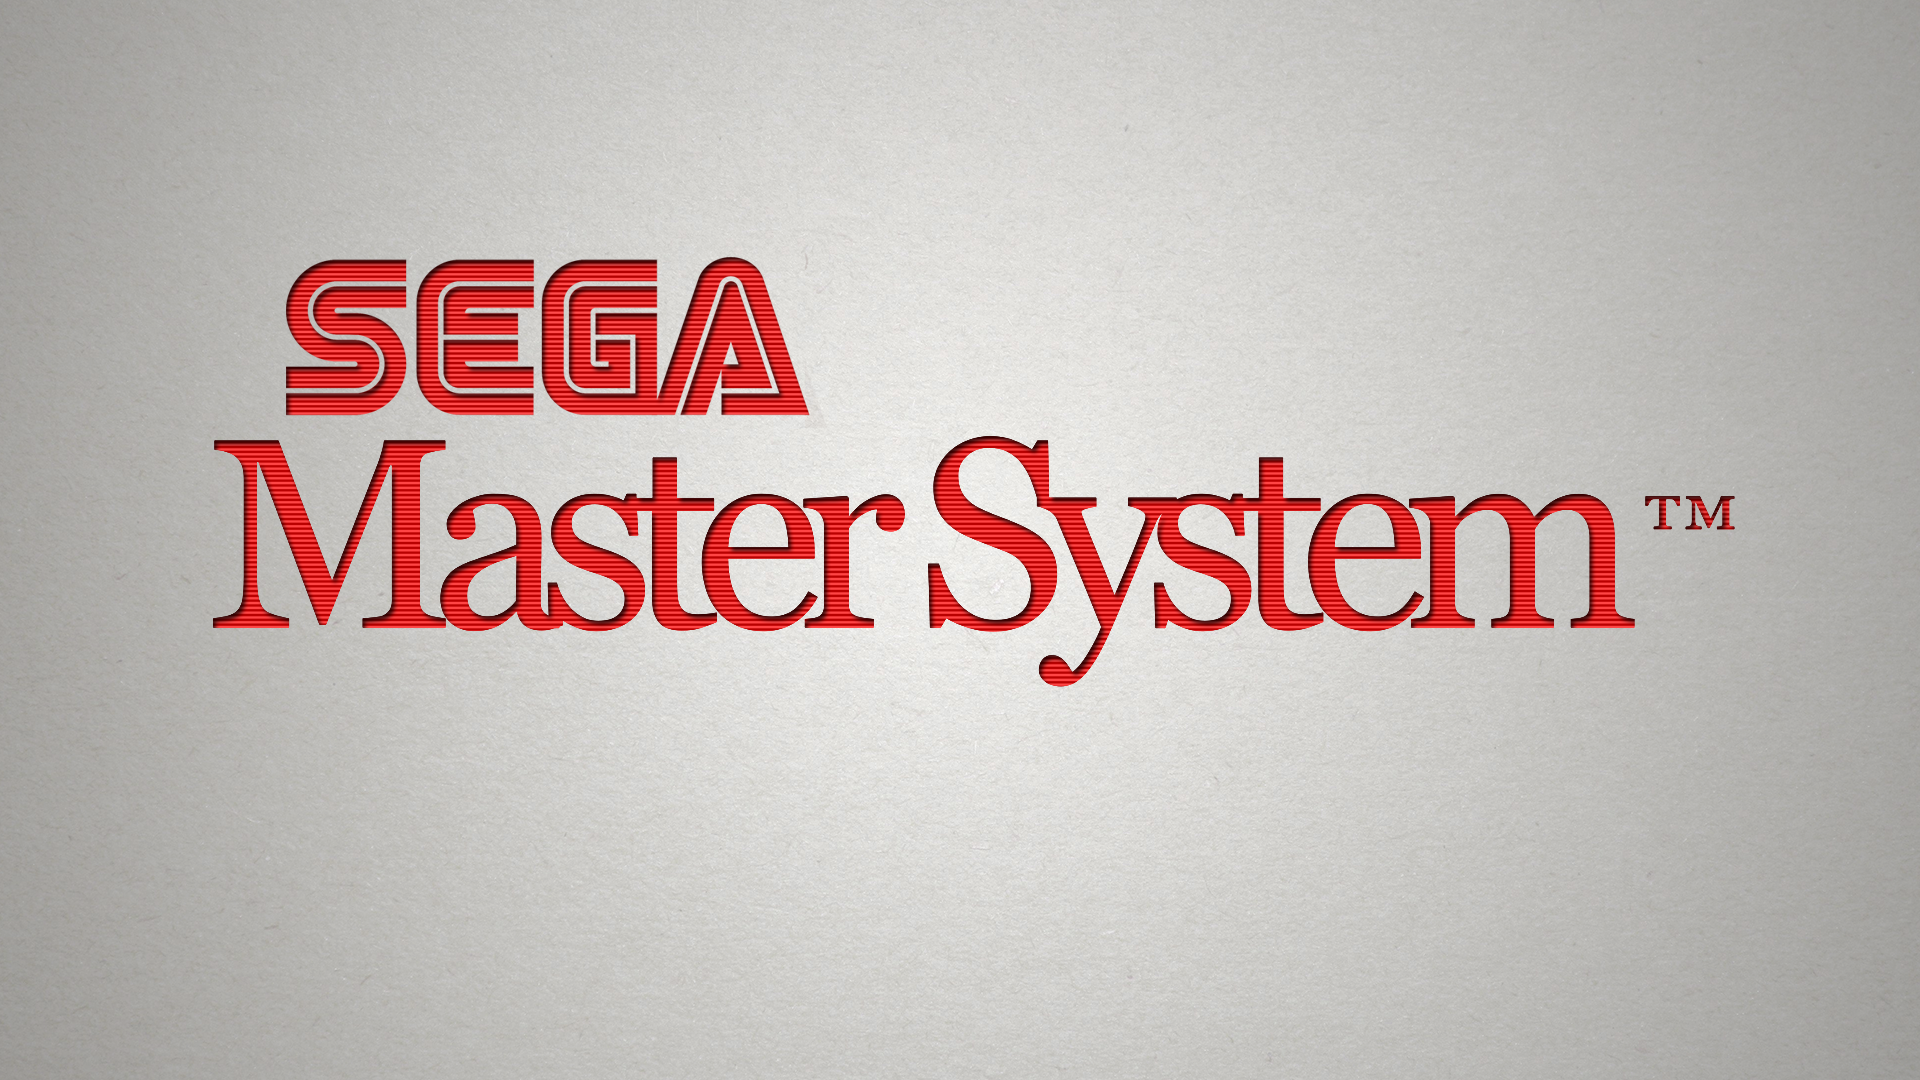 Sega Master System A Sub Gallery By Torinogt